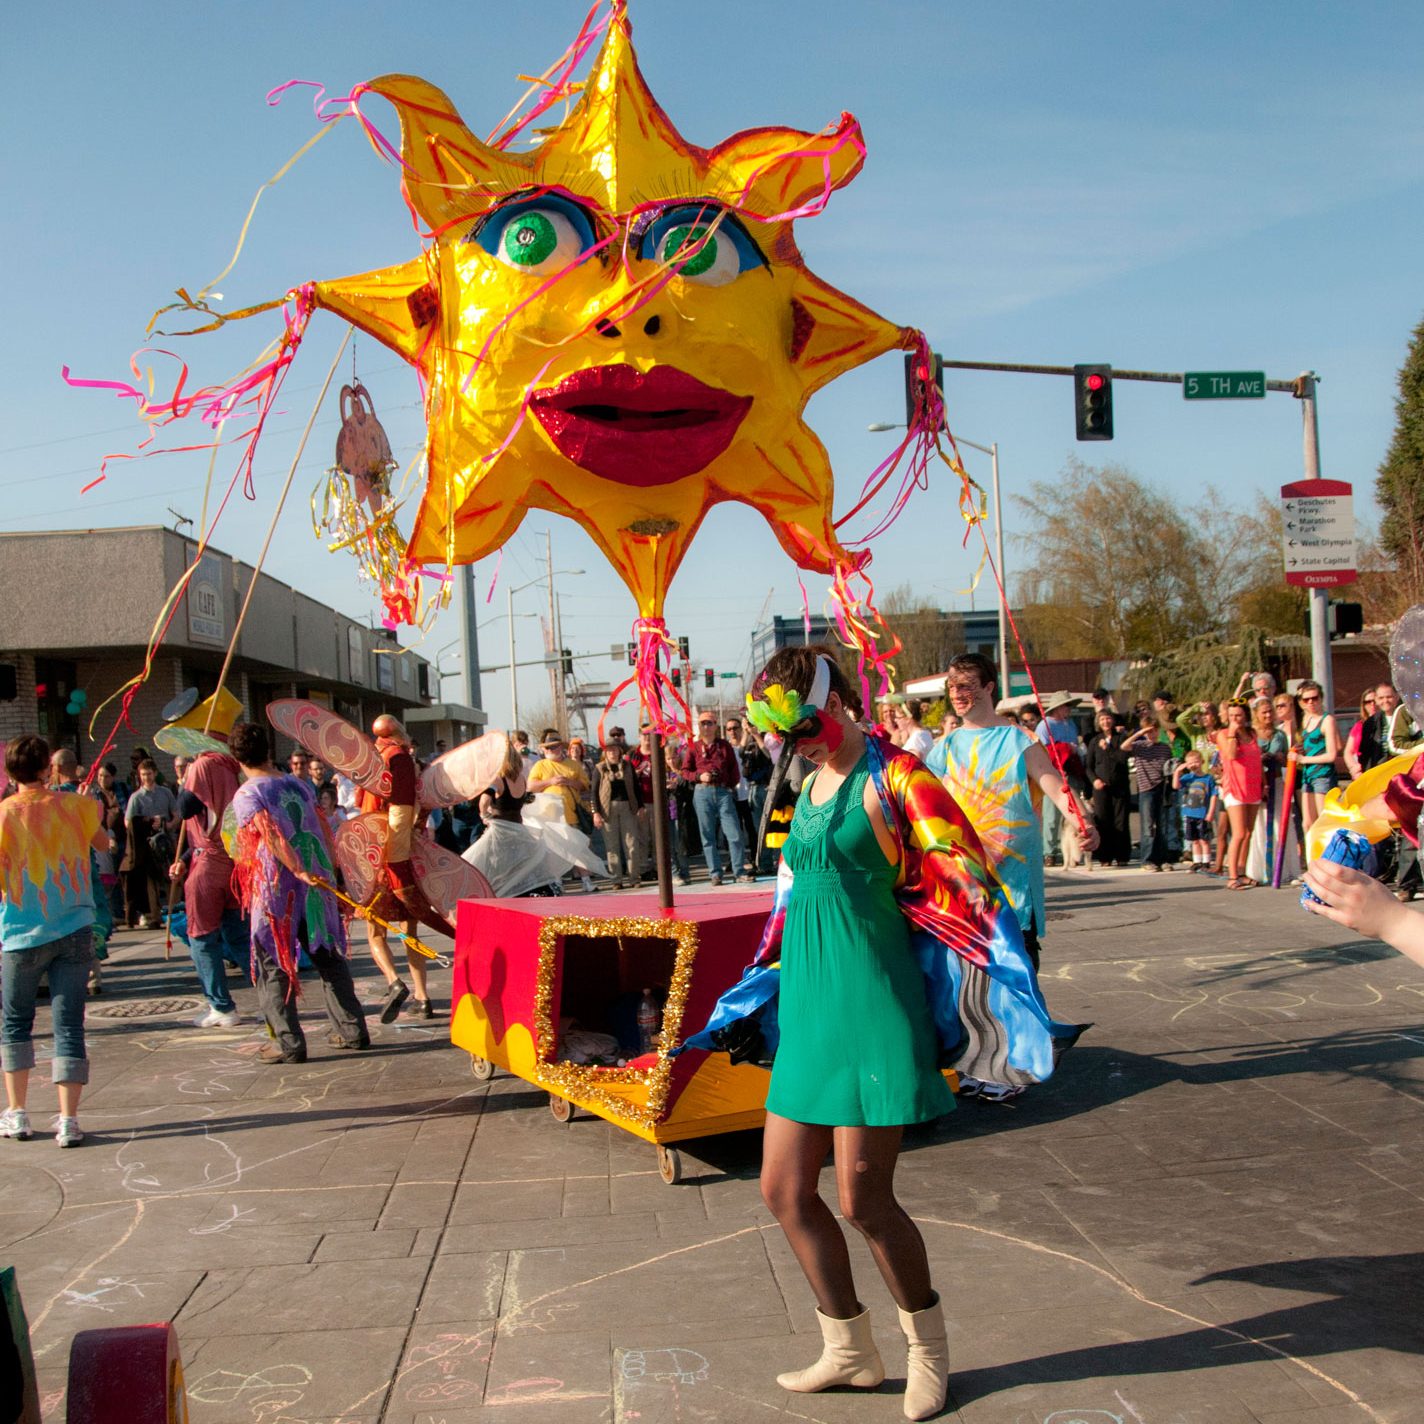 People with a large sun 'float' for Olympia's Procession of the species